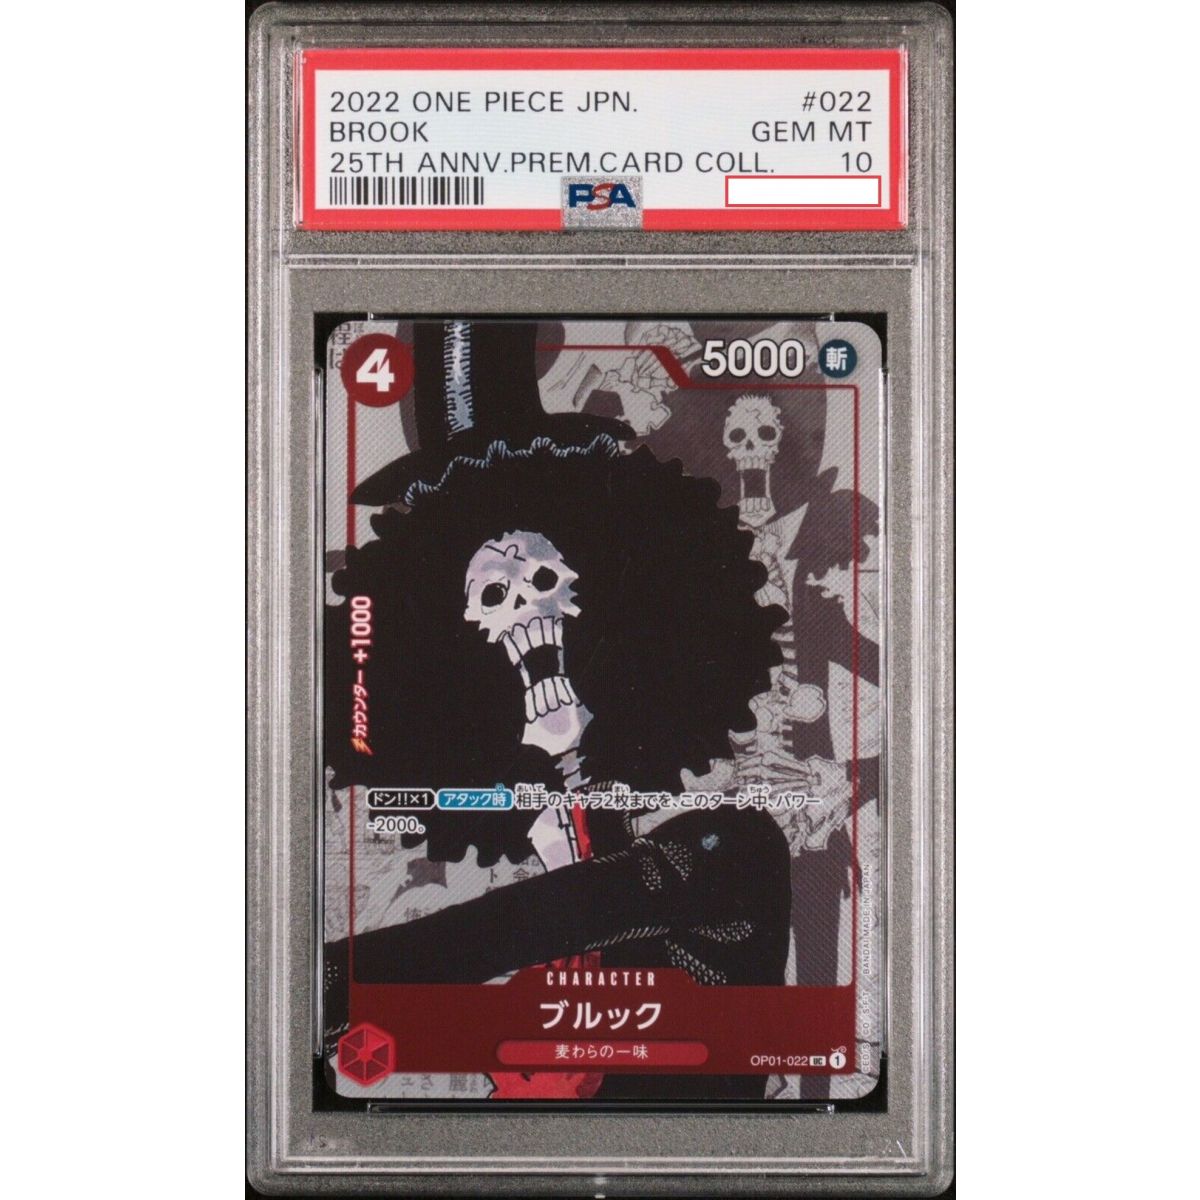 One Piece - Promo - Brook - OP01-022 - 25th Anniversary Premium Card Collection - Graded PSA 10 - JP